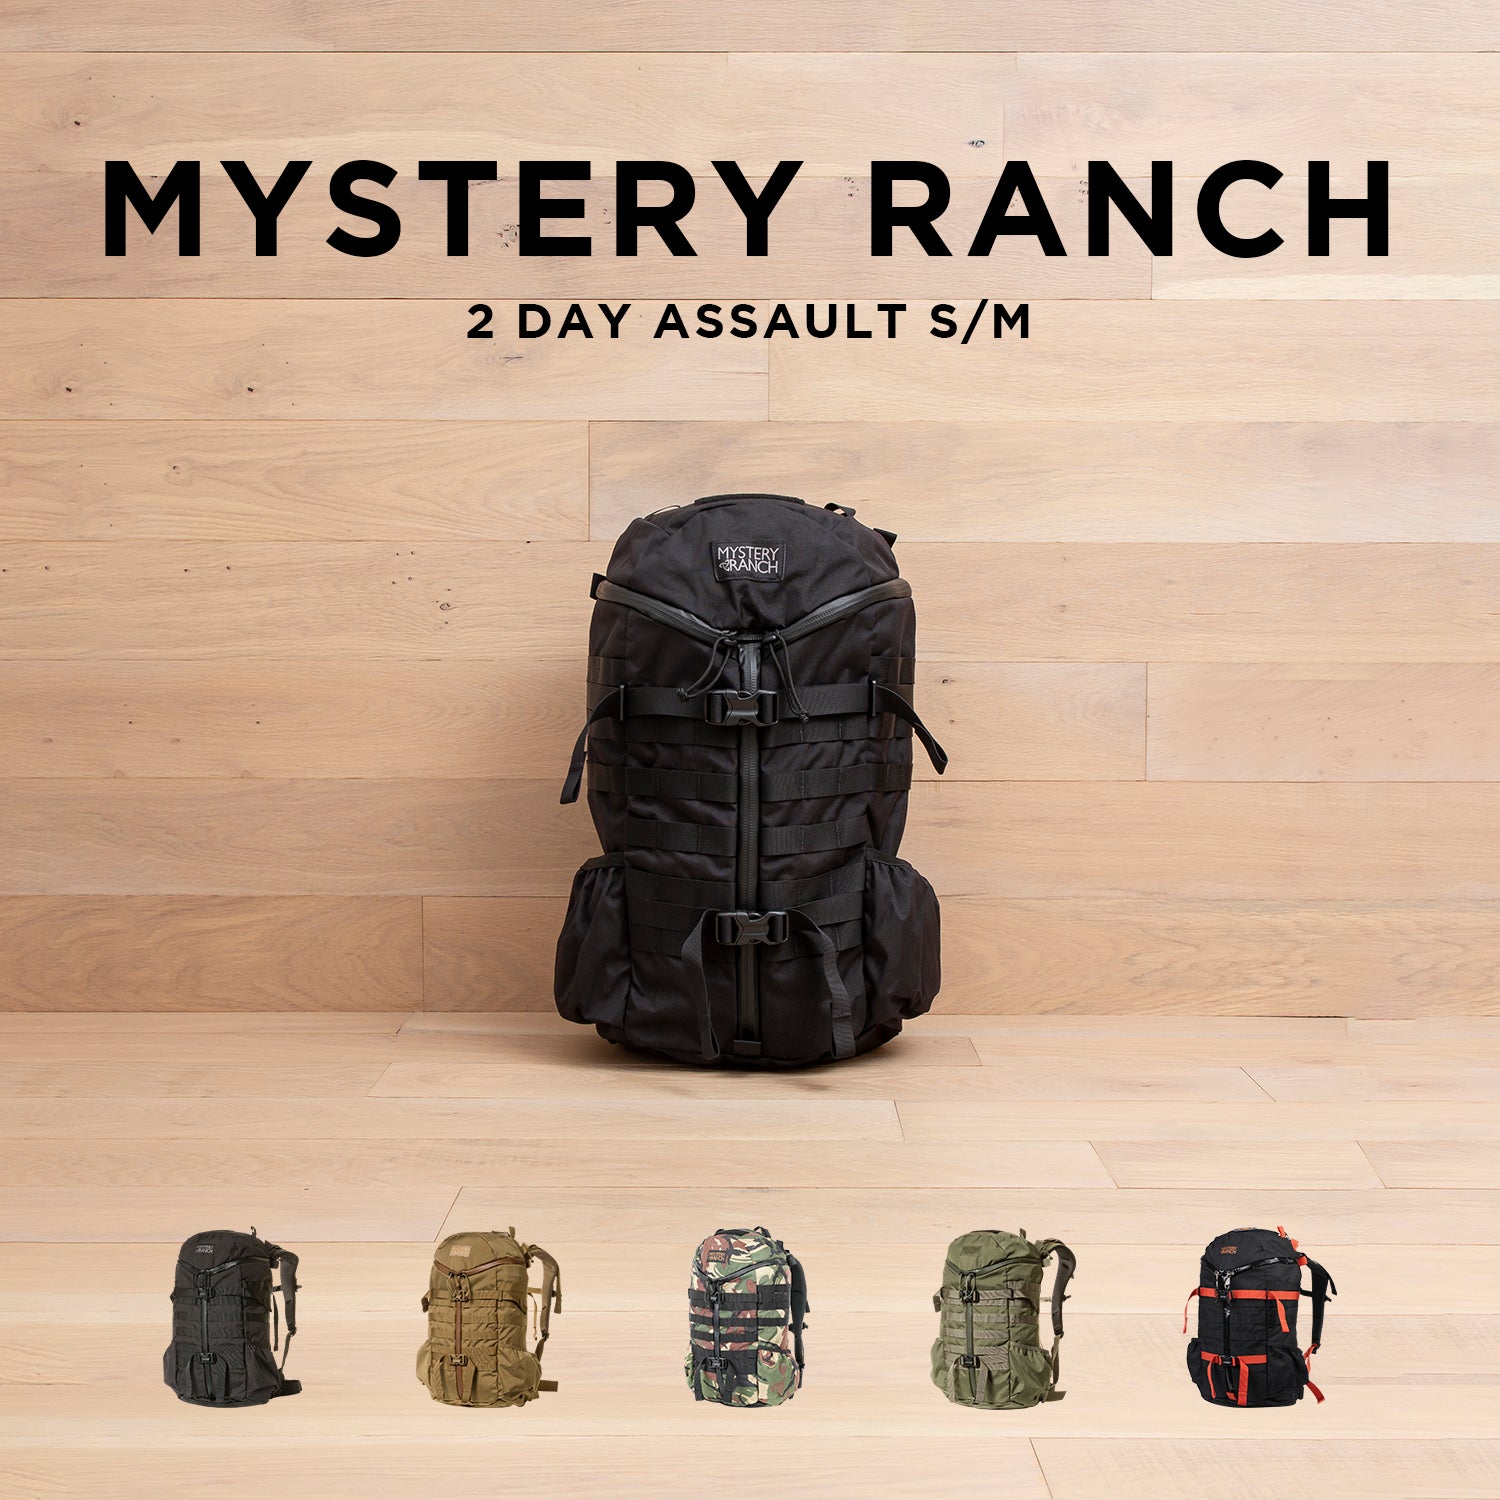 Mystery Ranch 2 Day Assault S/M